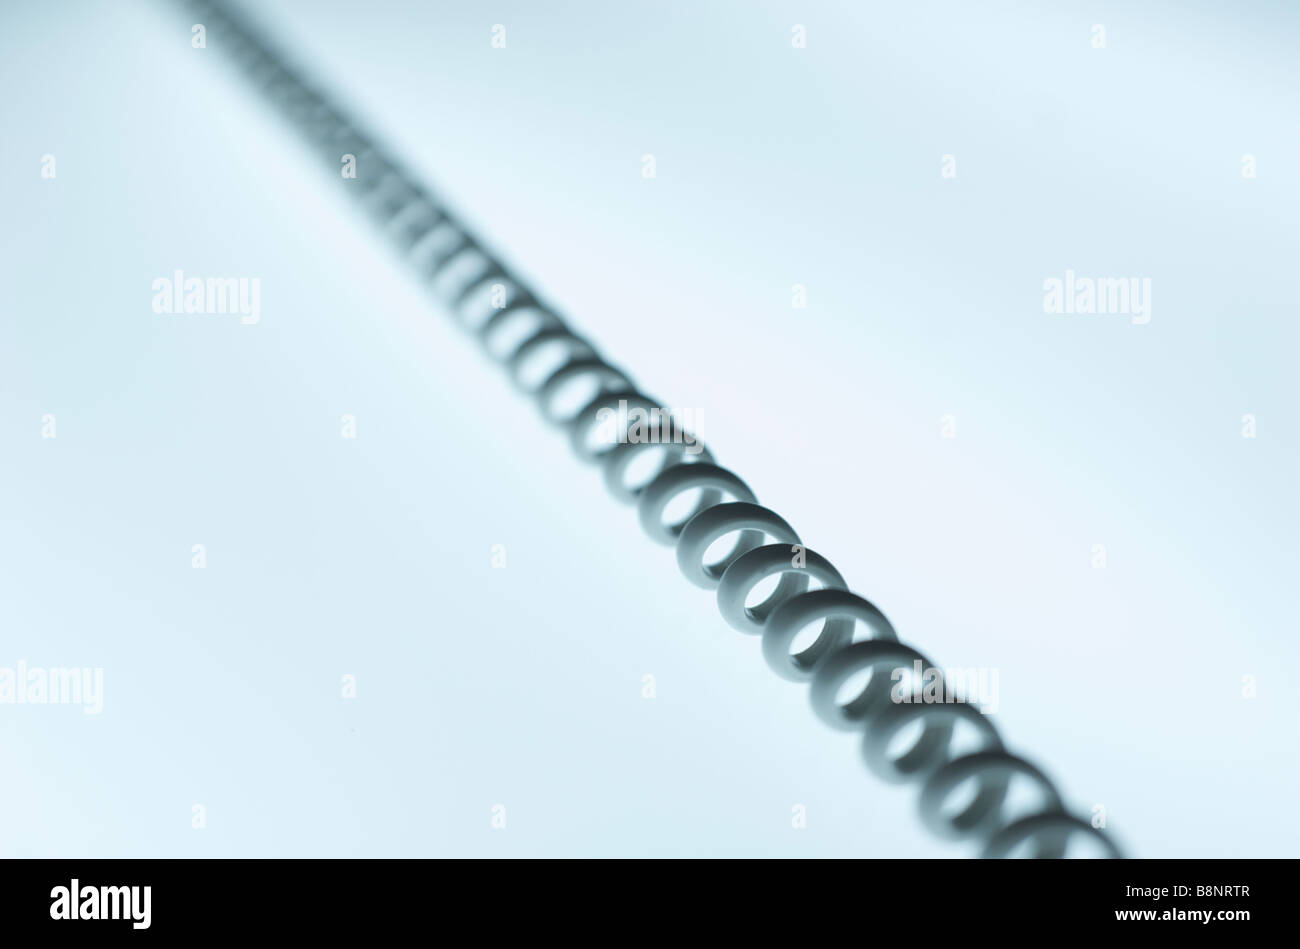 Closeup of Stretched Telephone Cord Stock Photo